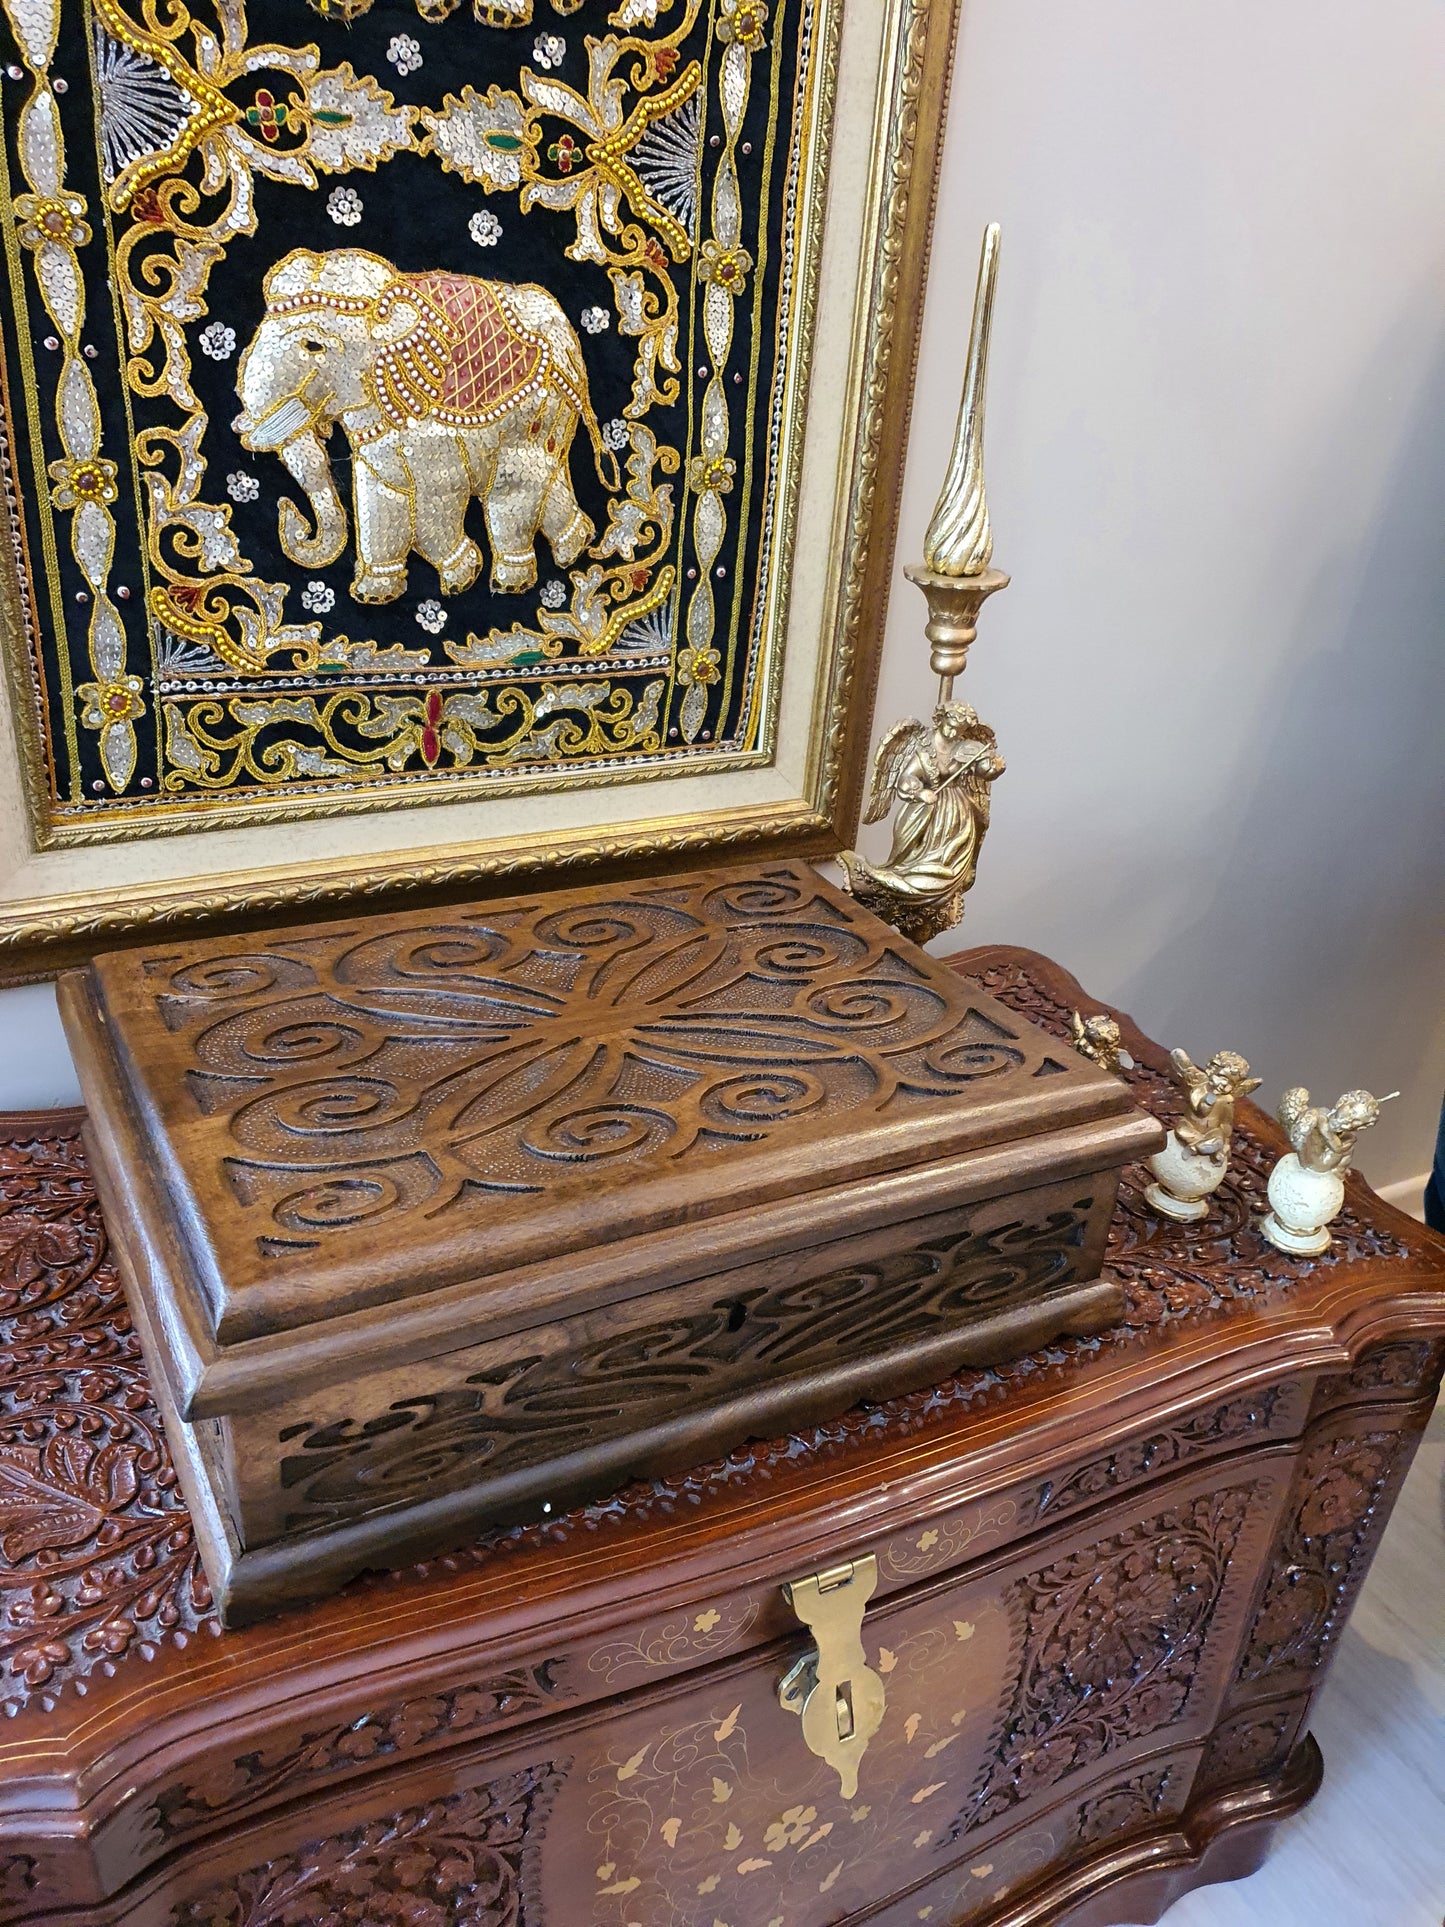 Exquisite craftsmanship with intricate carvings